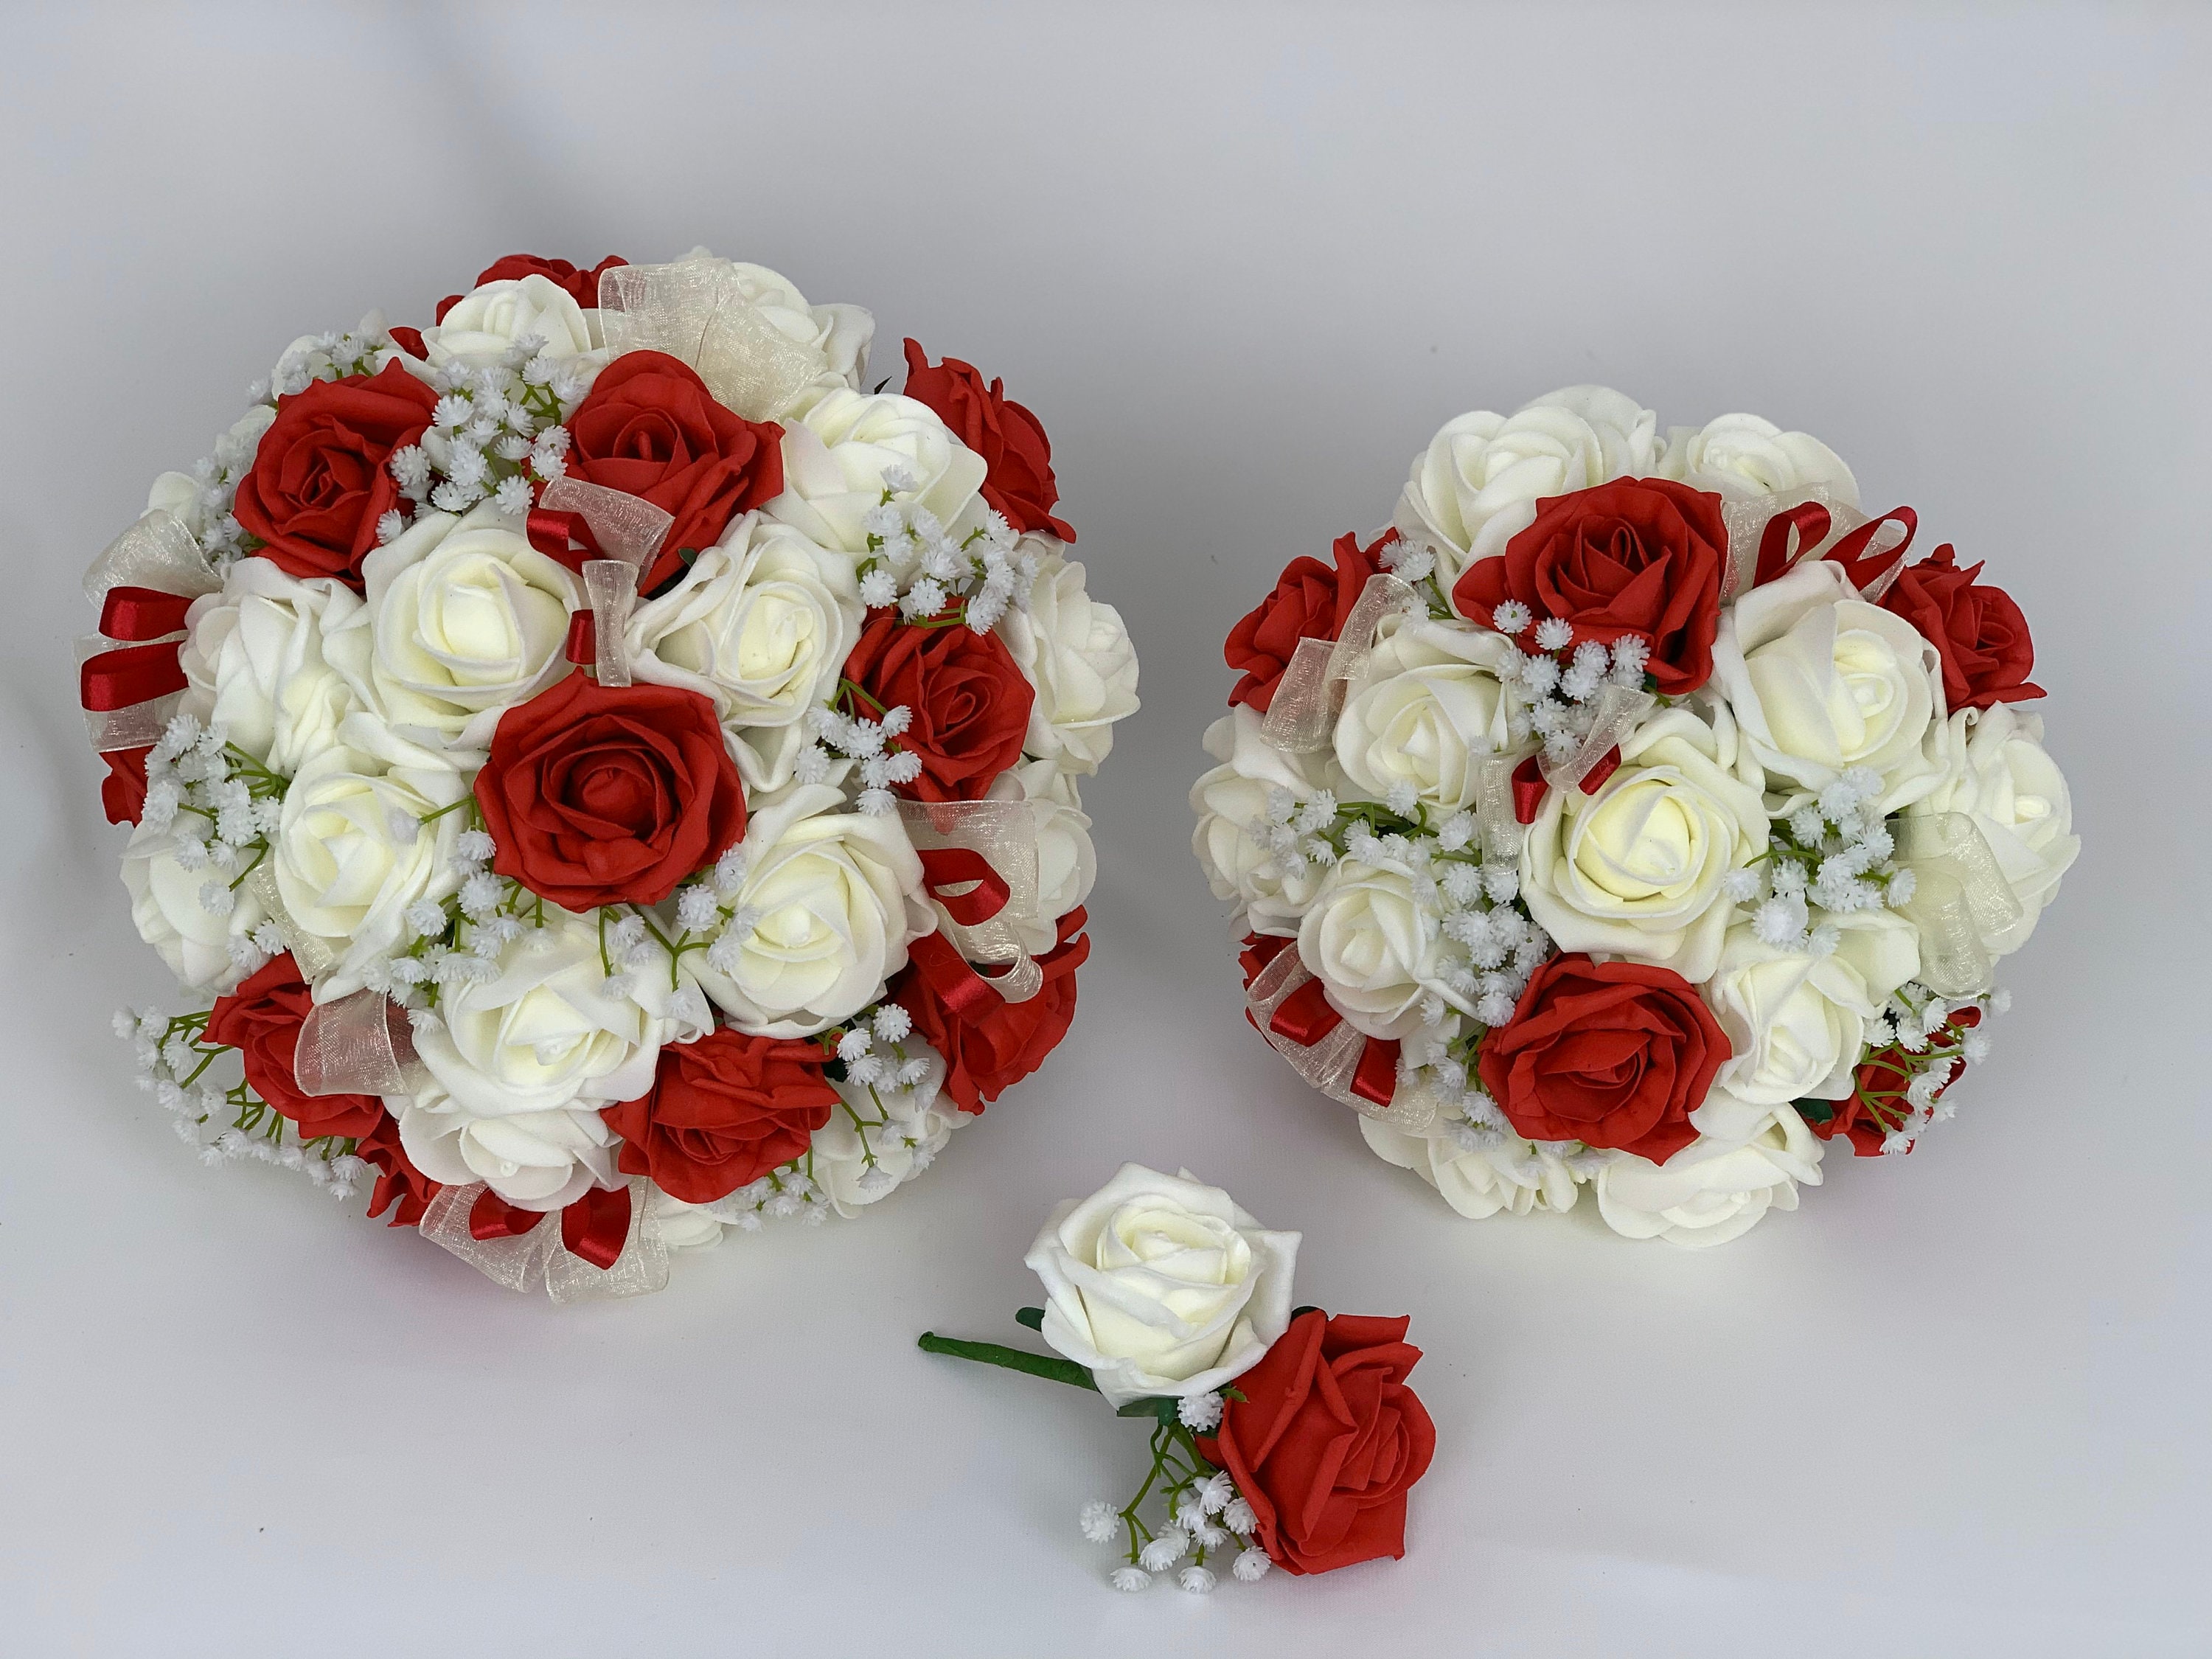 Romantic Red Rose Bouquet With Crystal Flowers For Brides Perfect For Home  And Wedding Decor From Yier63, $26.29